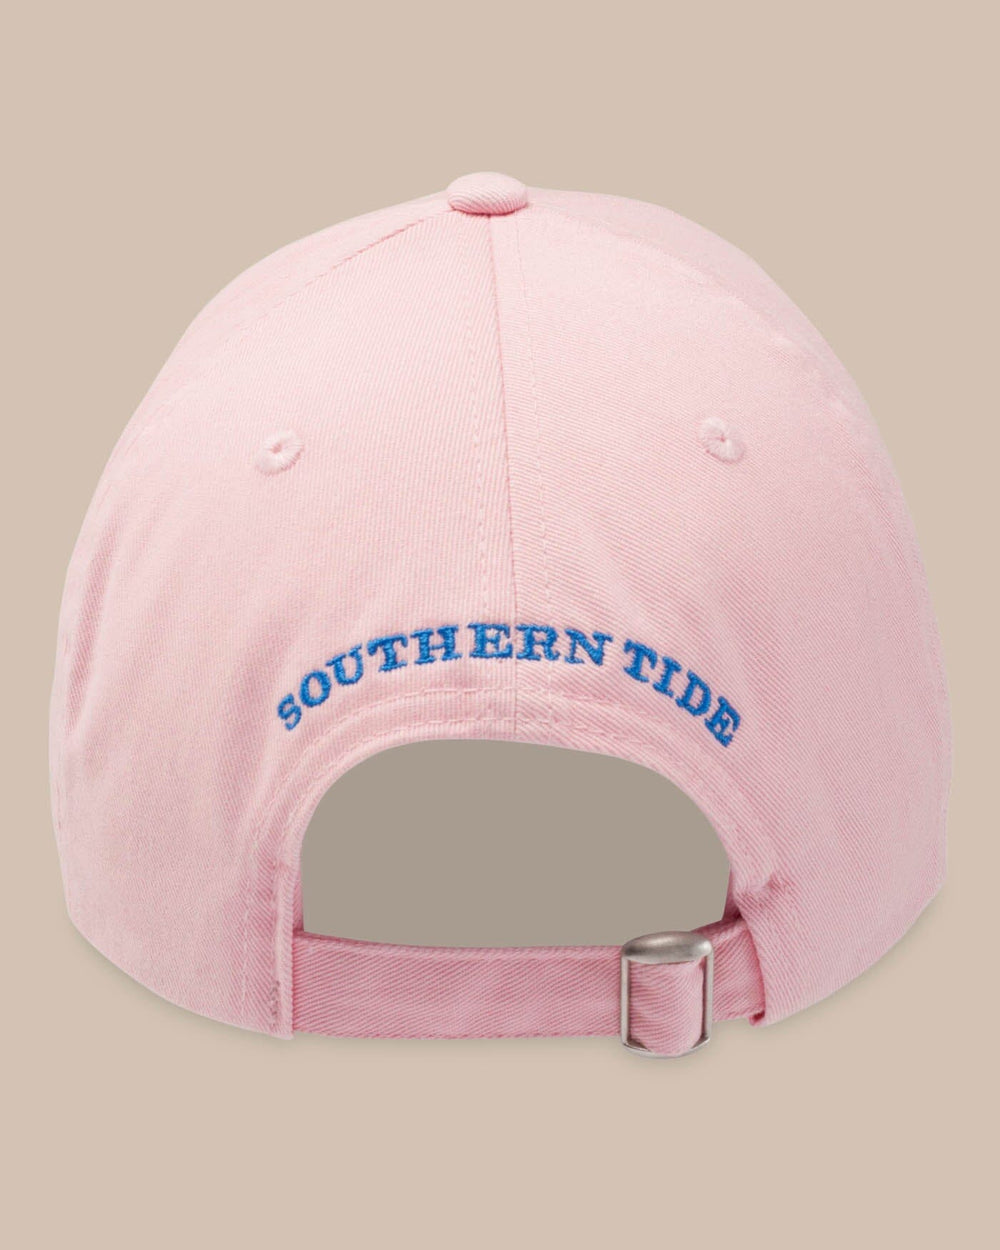 The back of the Skipjack Hat by Southern Tide - Pink